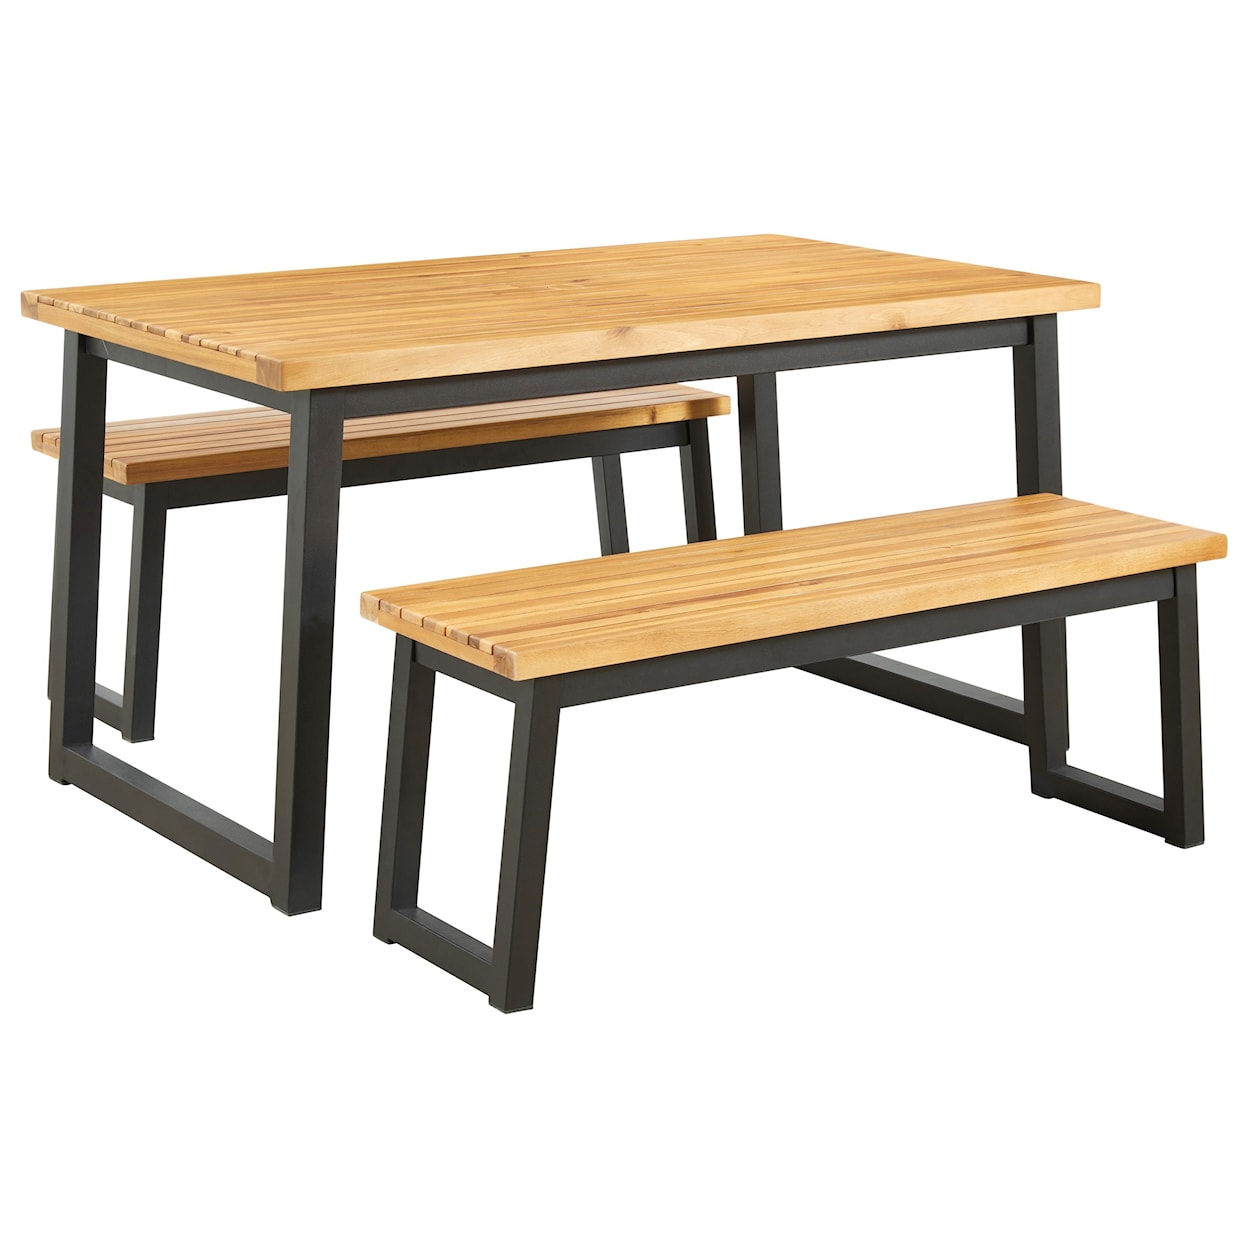 Signature Design by Ashley Town Wood Dining Table Set